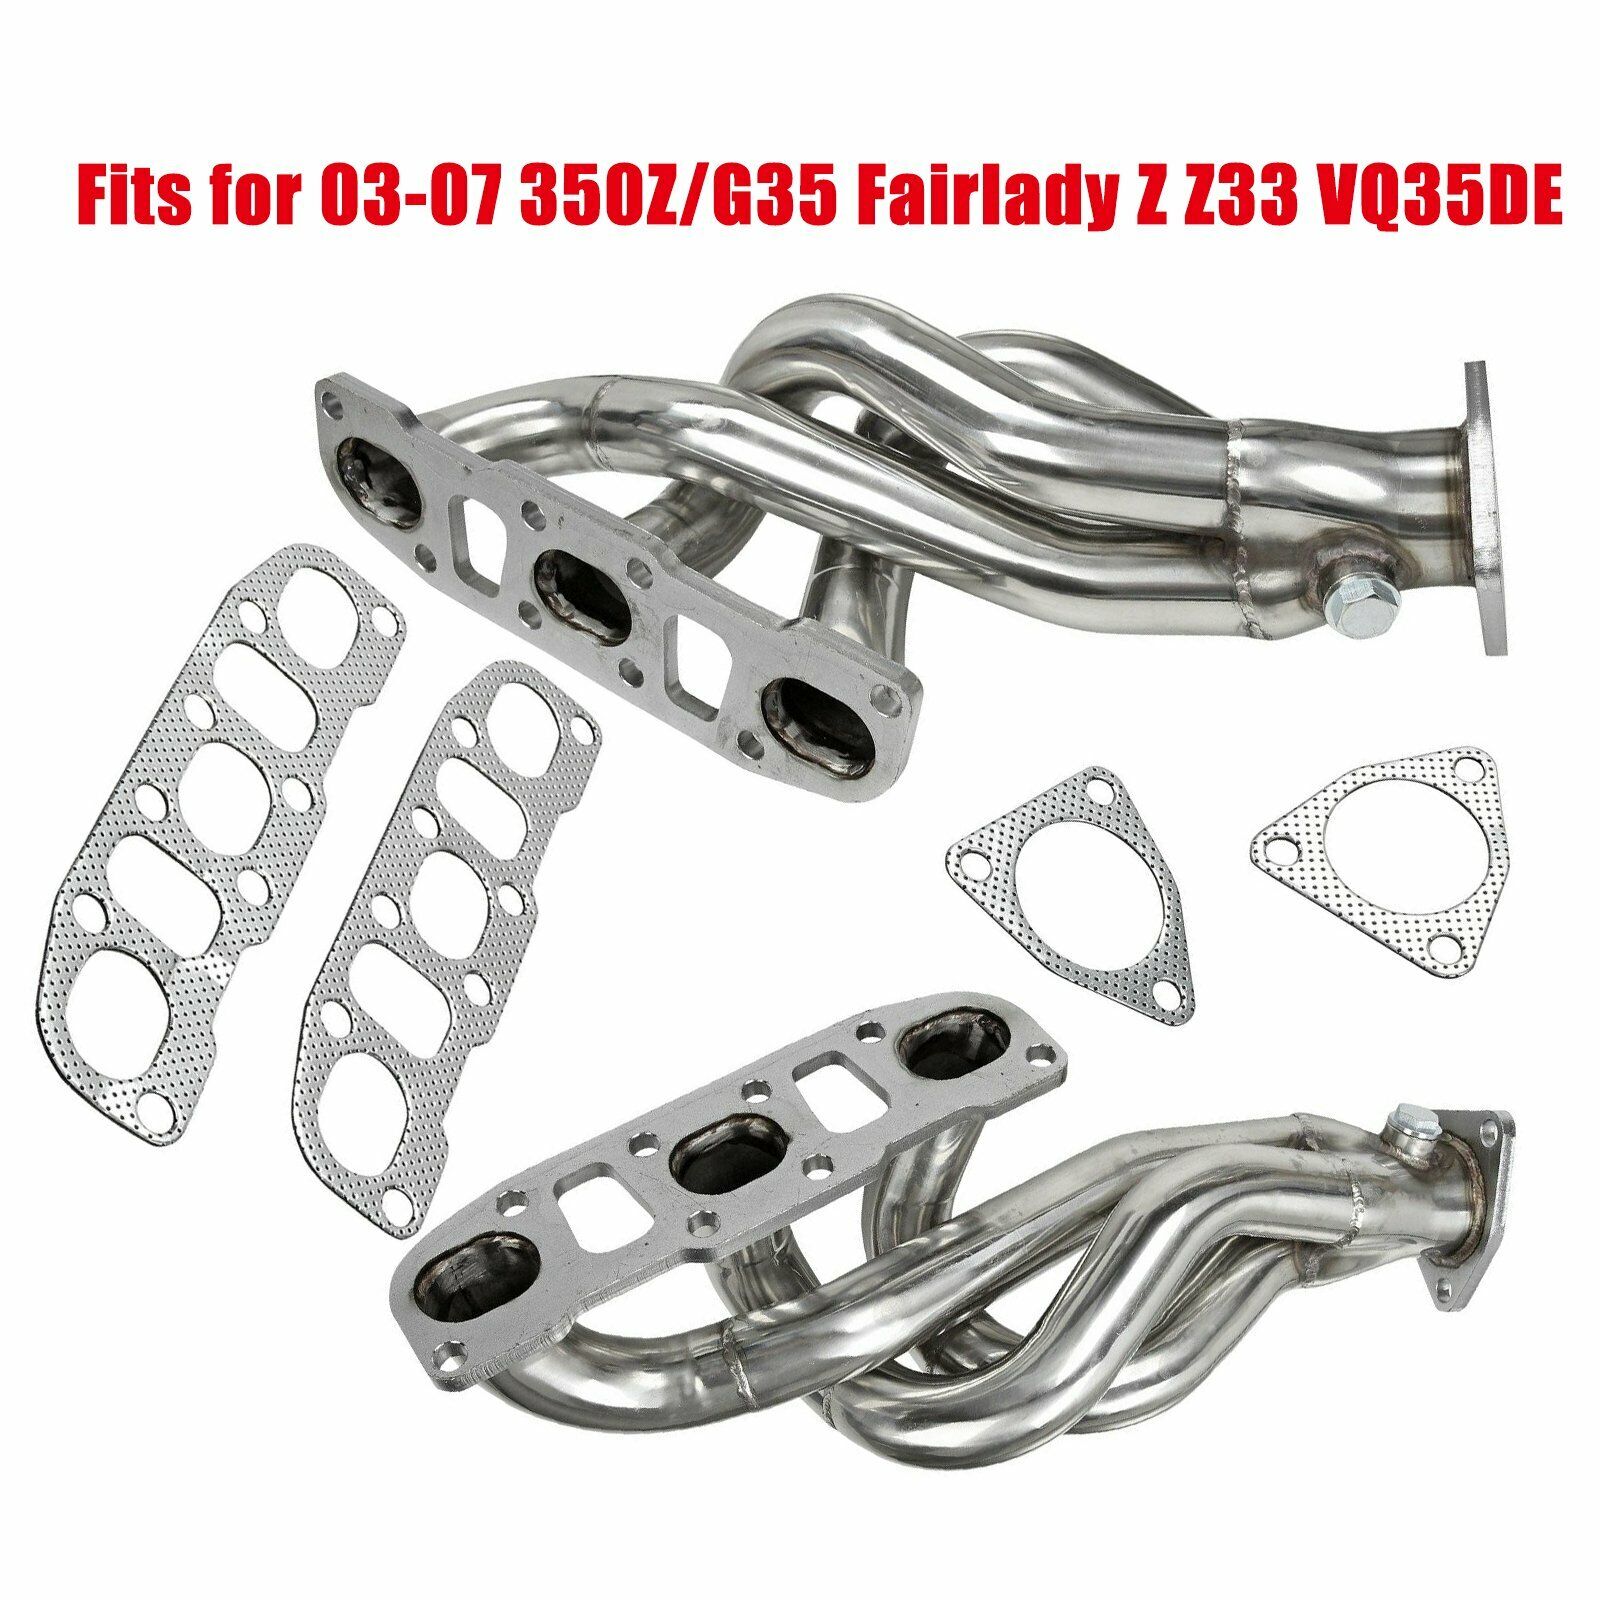 Stainless Exhaust Header Manifold Fits for 03-07 350Z/G35 Fairlady Z Z33 VQ35DE